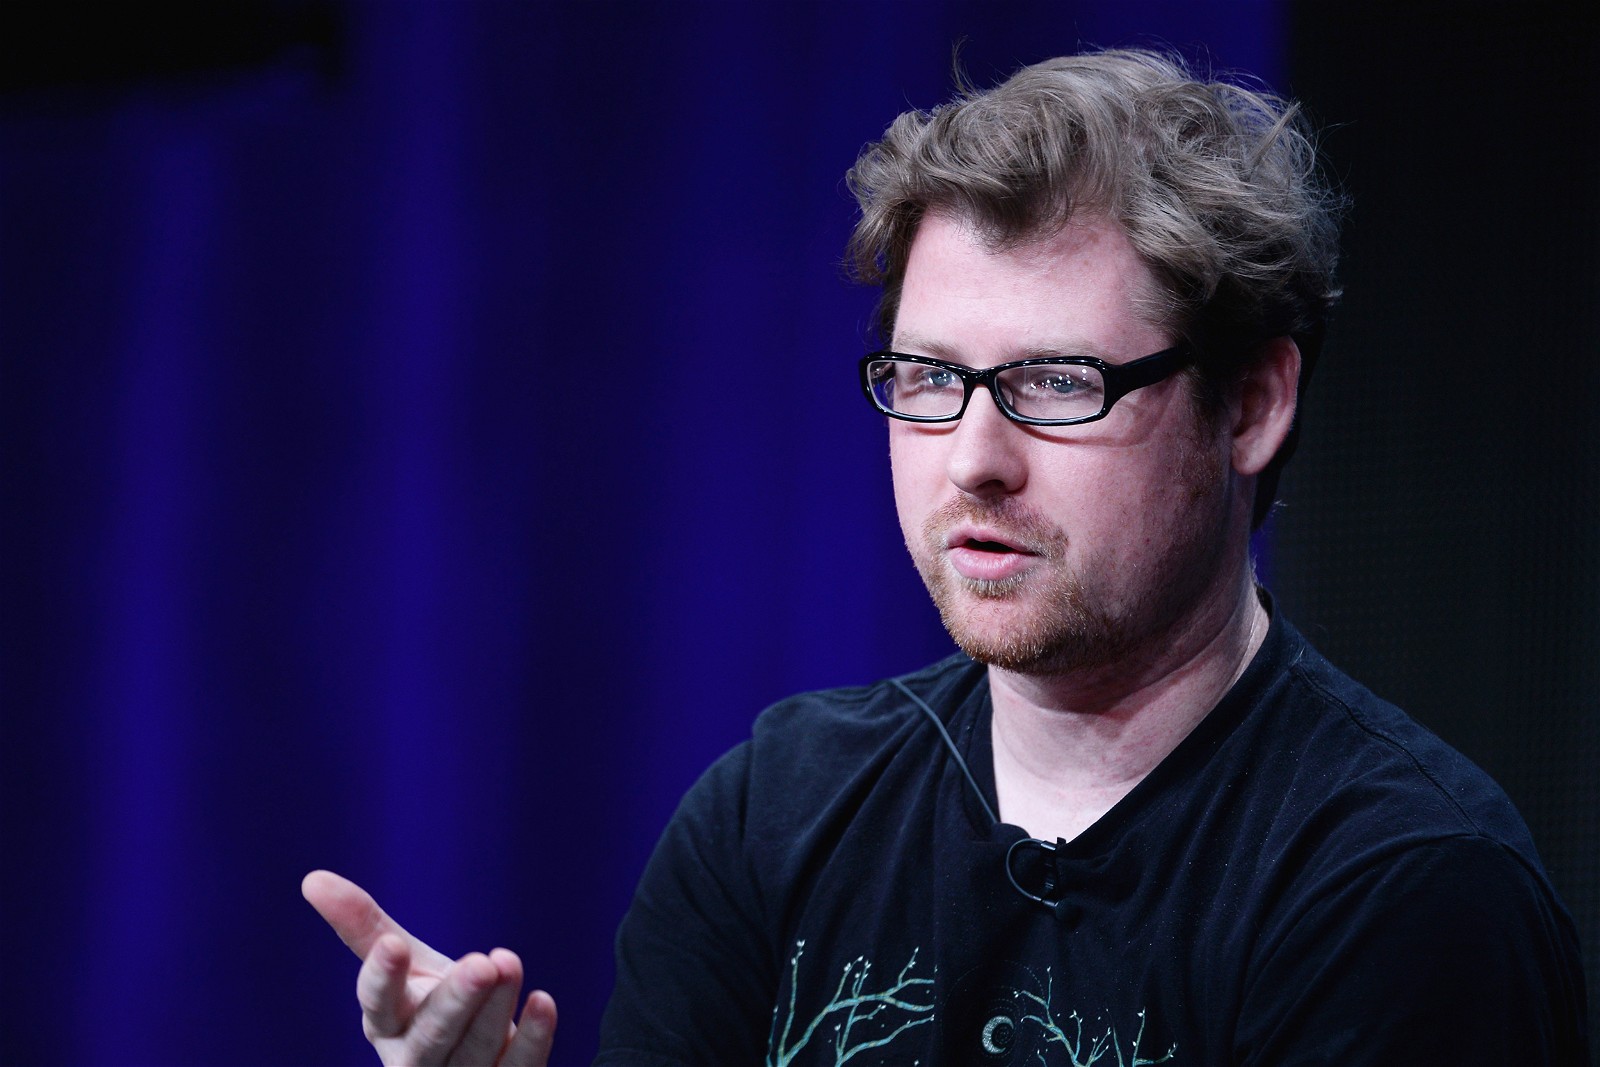 Justin Roiland is the co-creator of Rick and Morty (2013-).